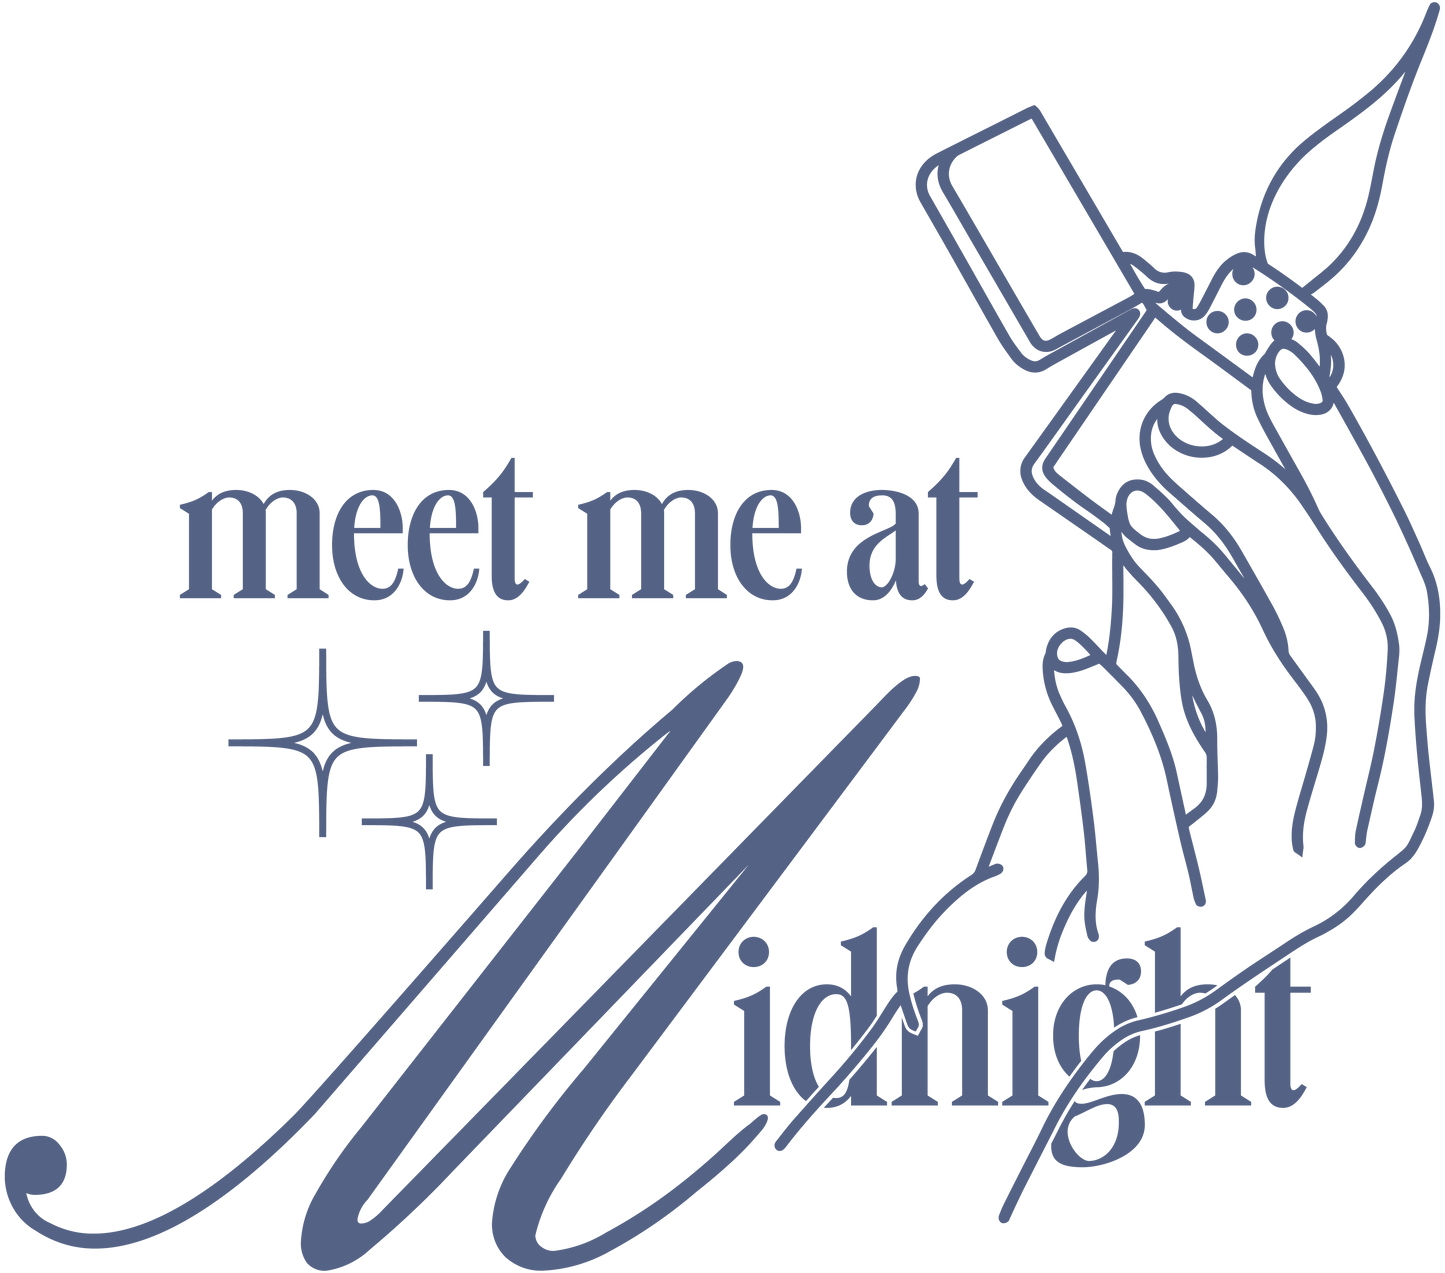 * Meet me at Midnight Decal